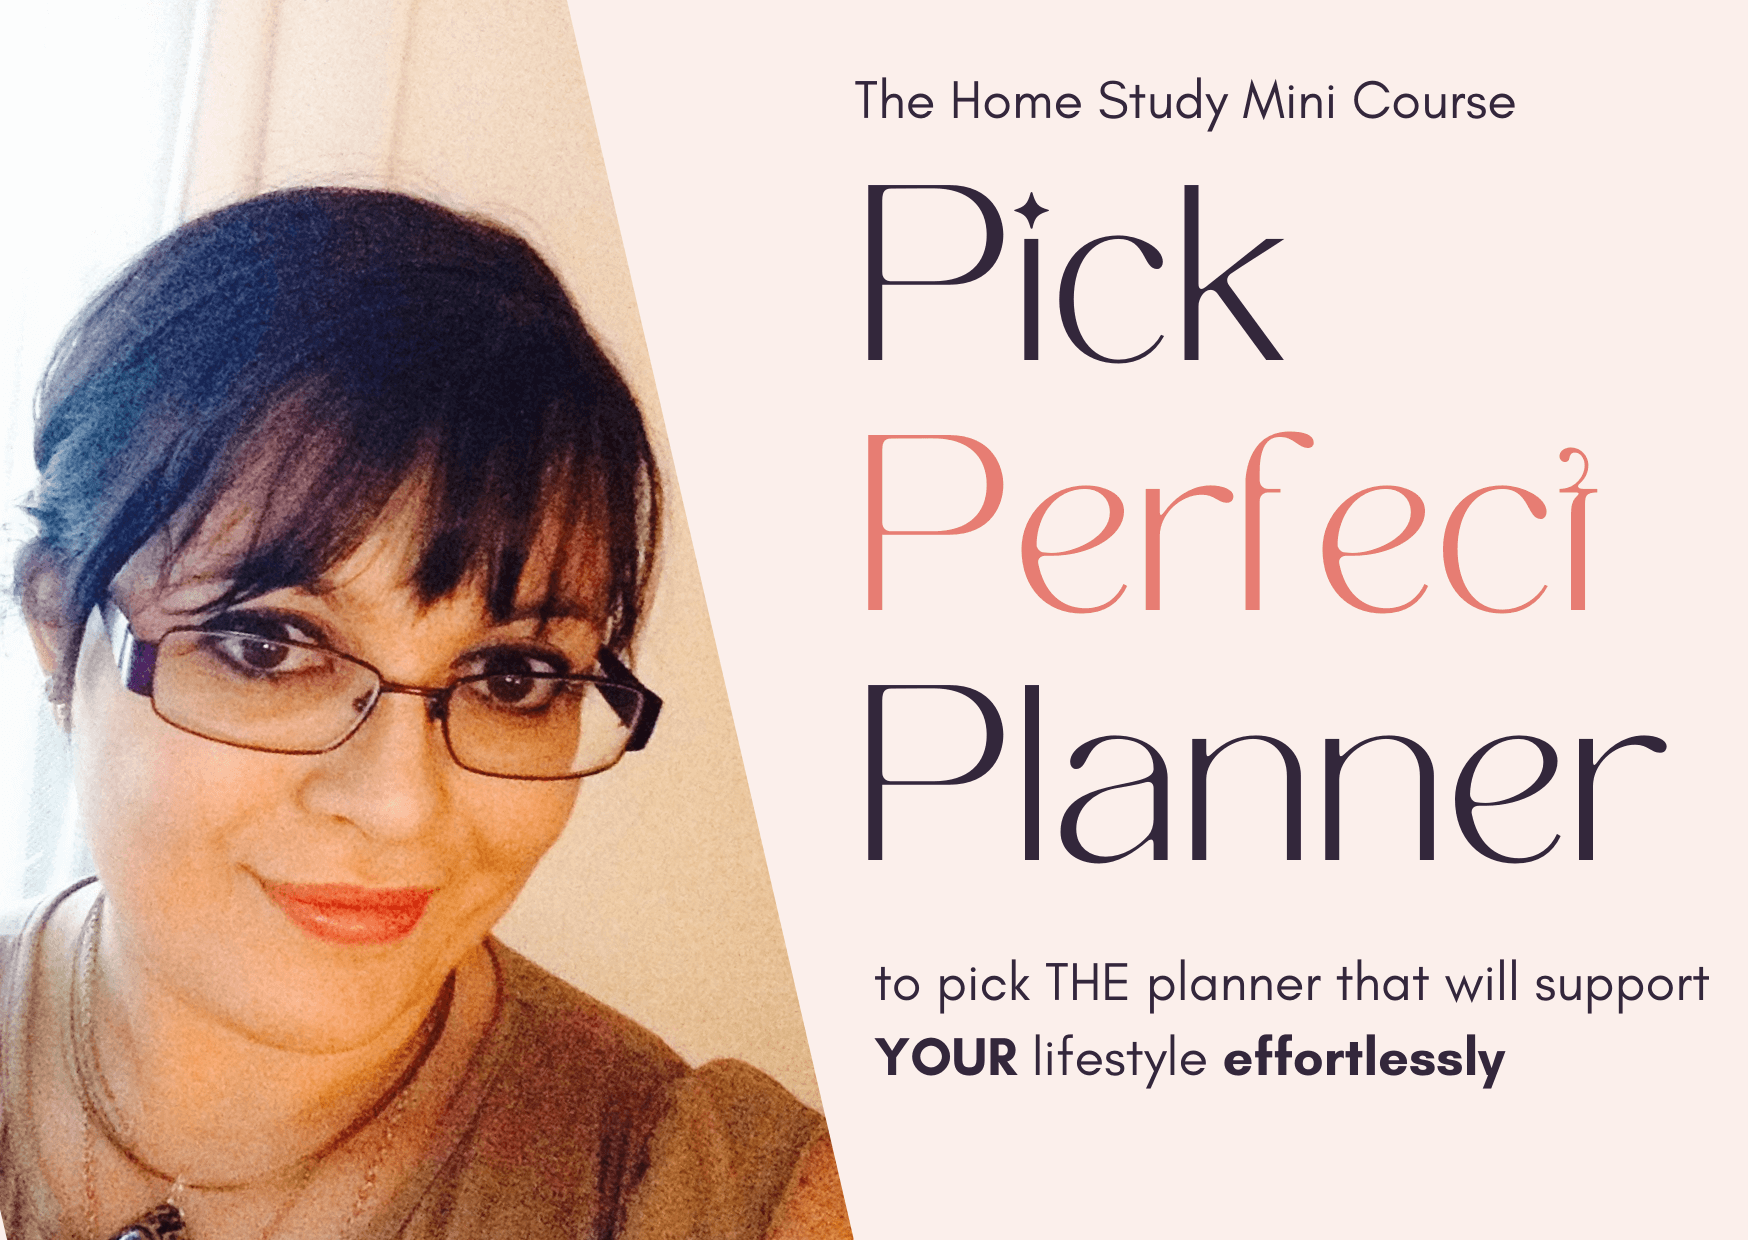 The home study mini course to find the physical planner when you're introvert